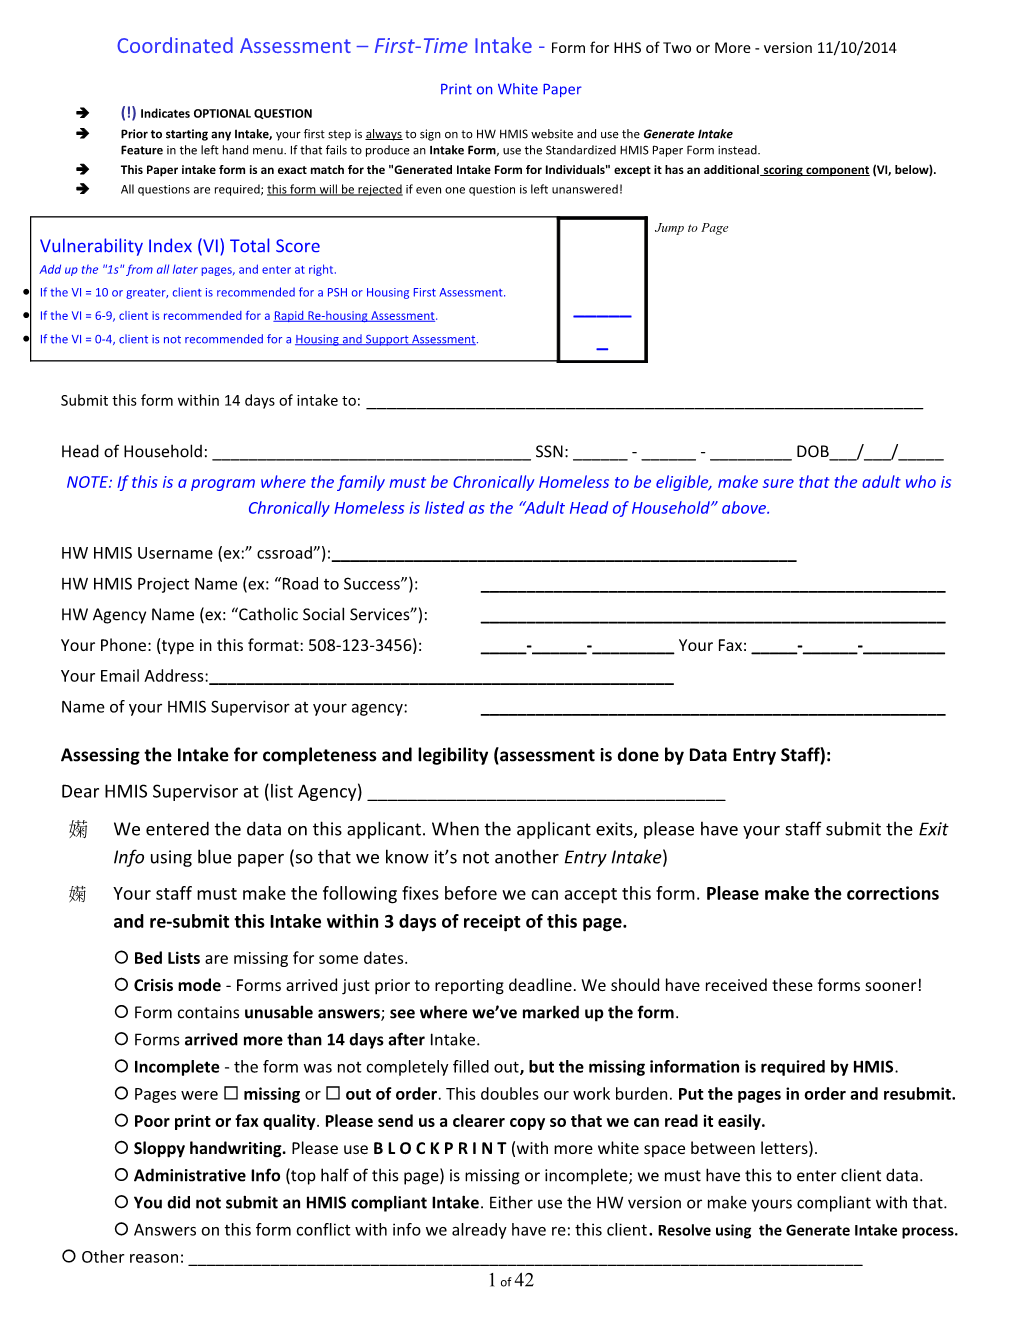 Coordinated Assessment First-Time Intake - Form for HHS of Two Or More - Version 11/10/2014